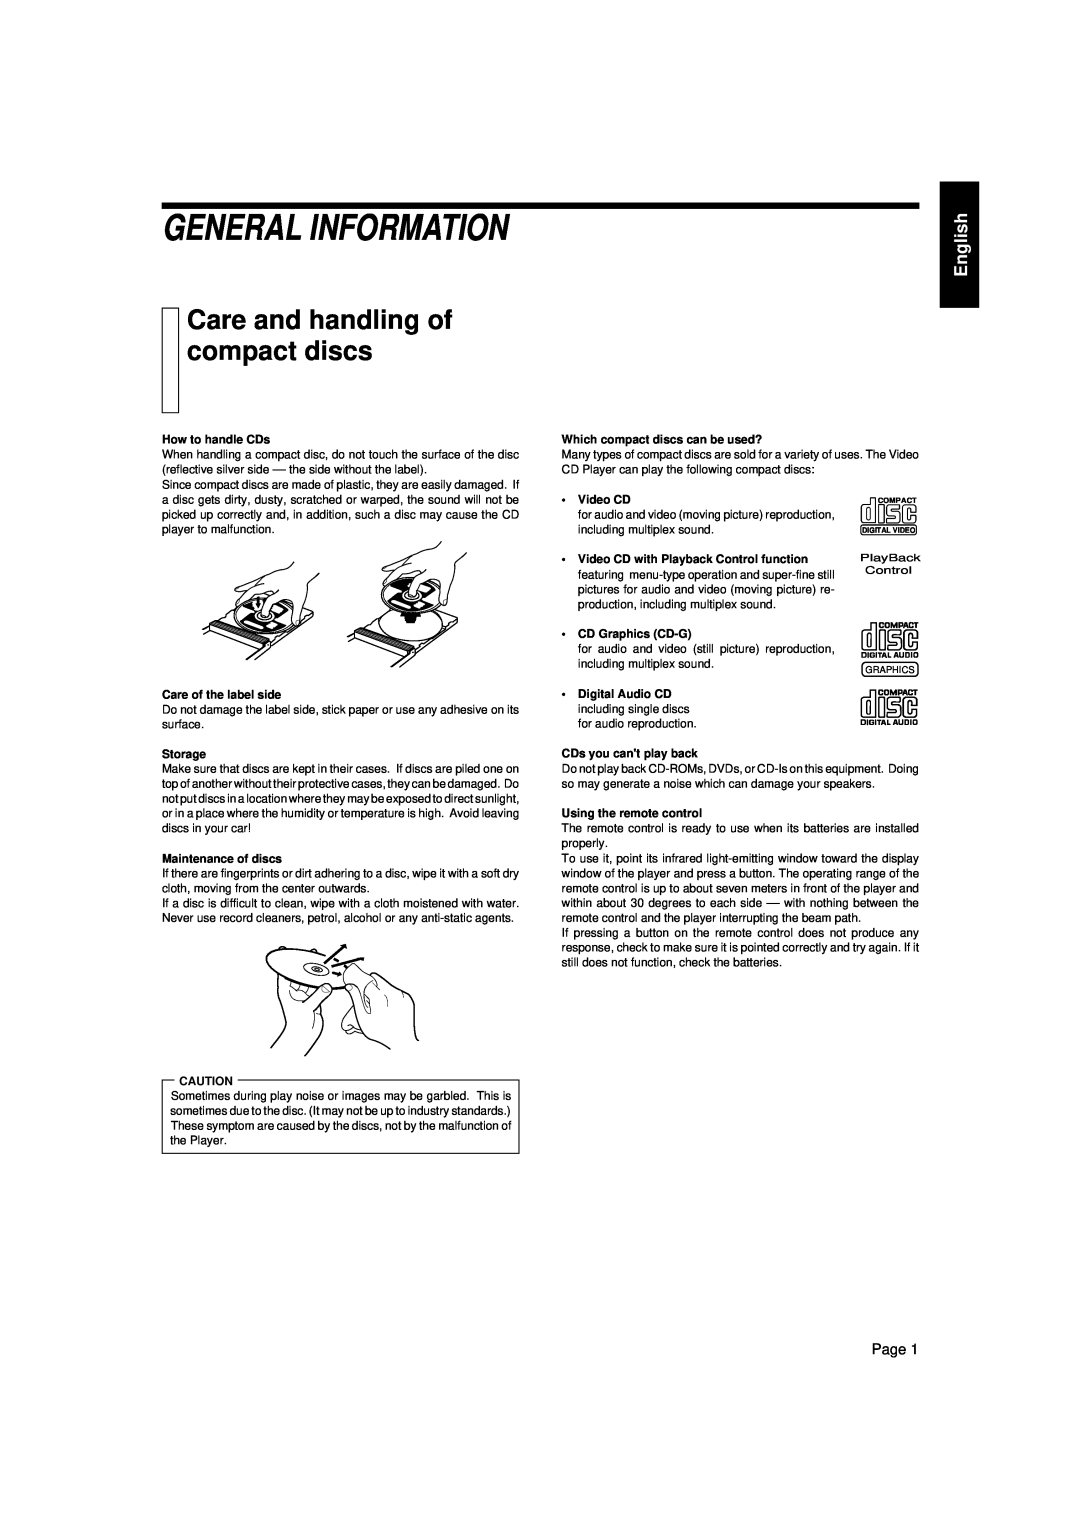 JVC LET0088-001A, XL-SV22BK manual General Information, Care and handling of compact discs, English, Page 